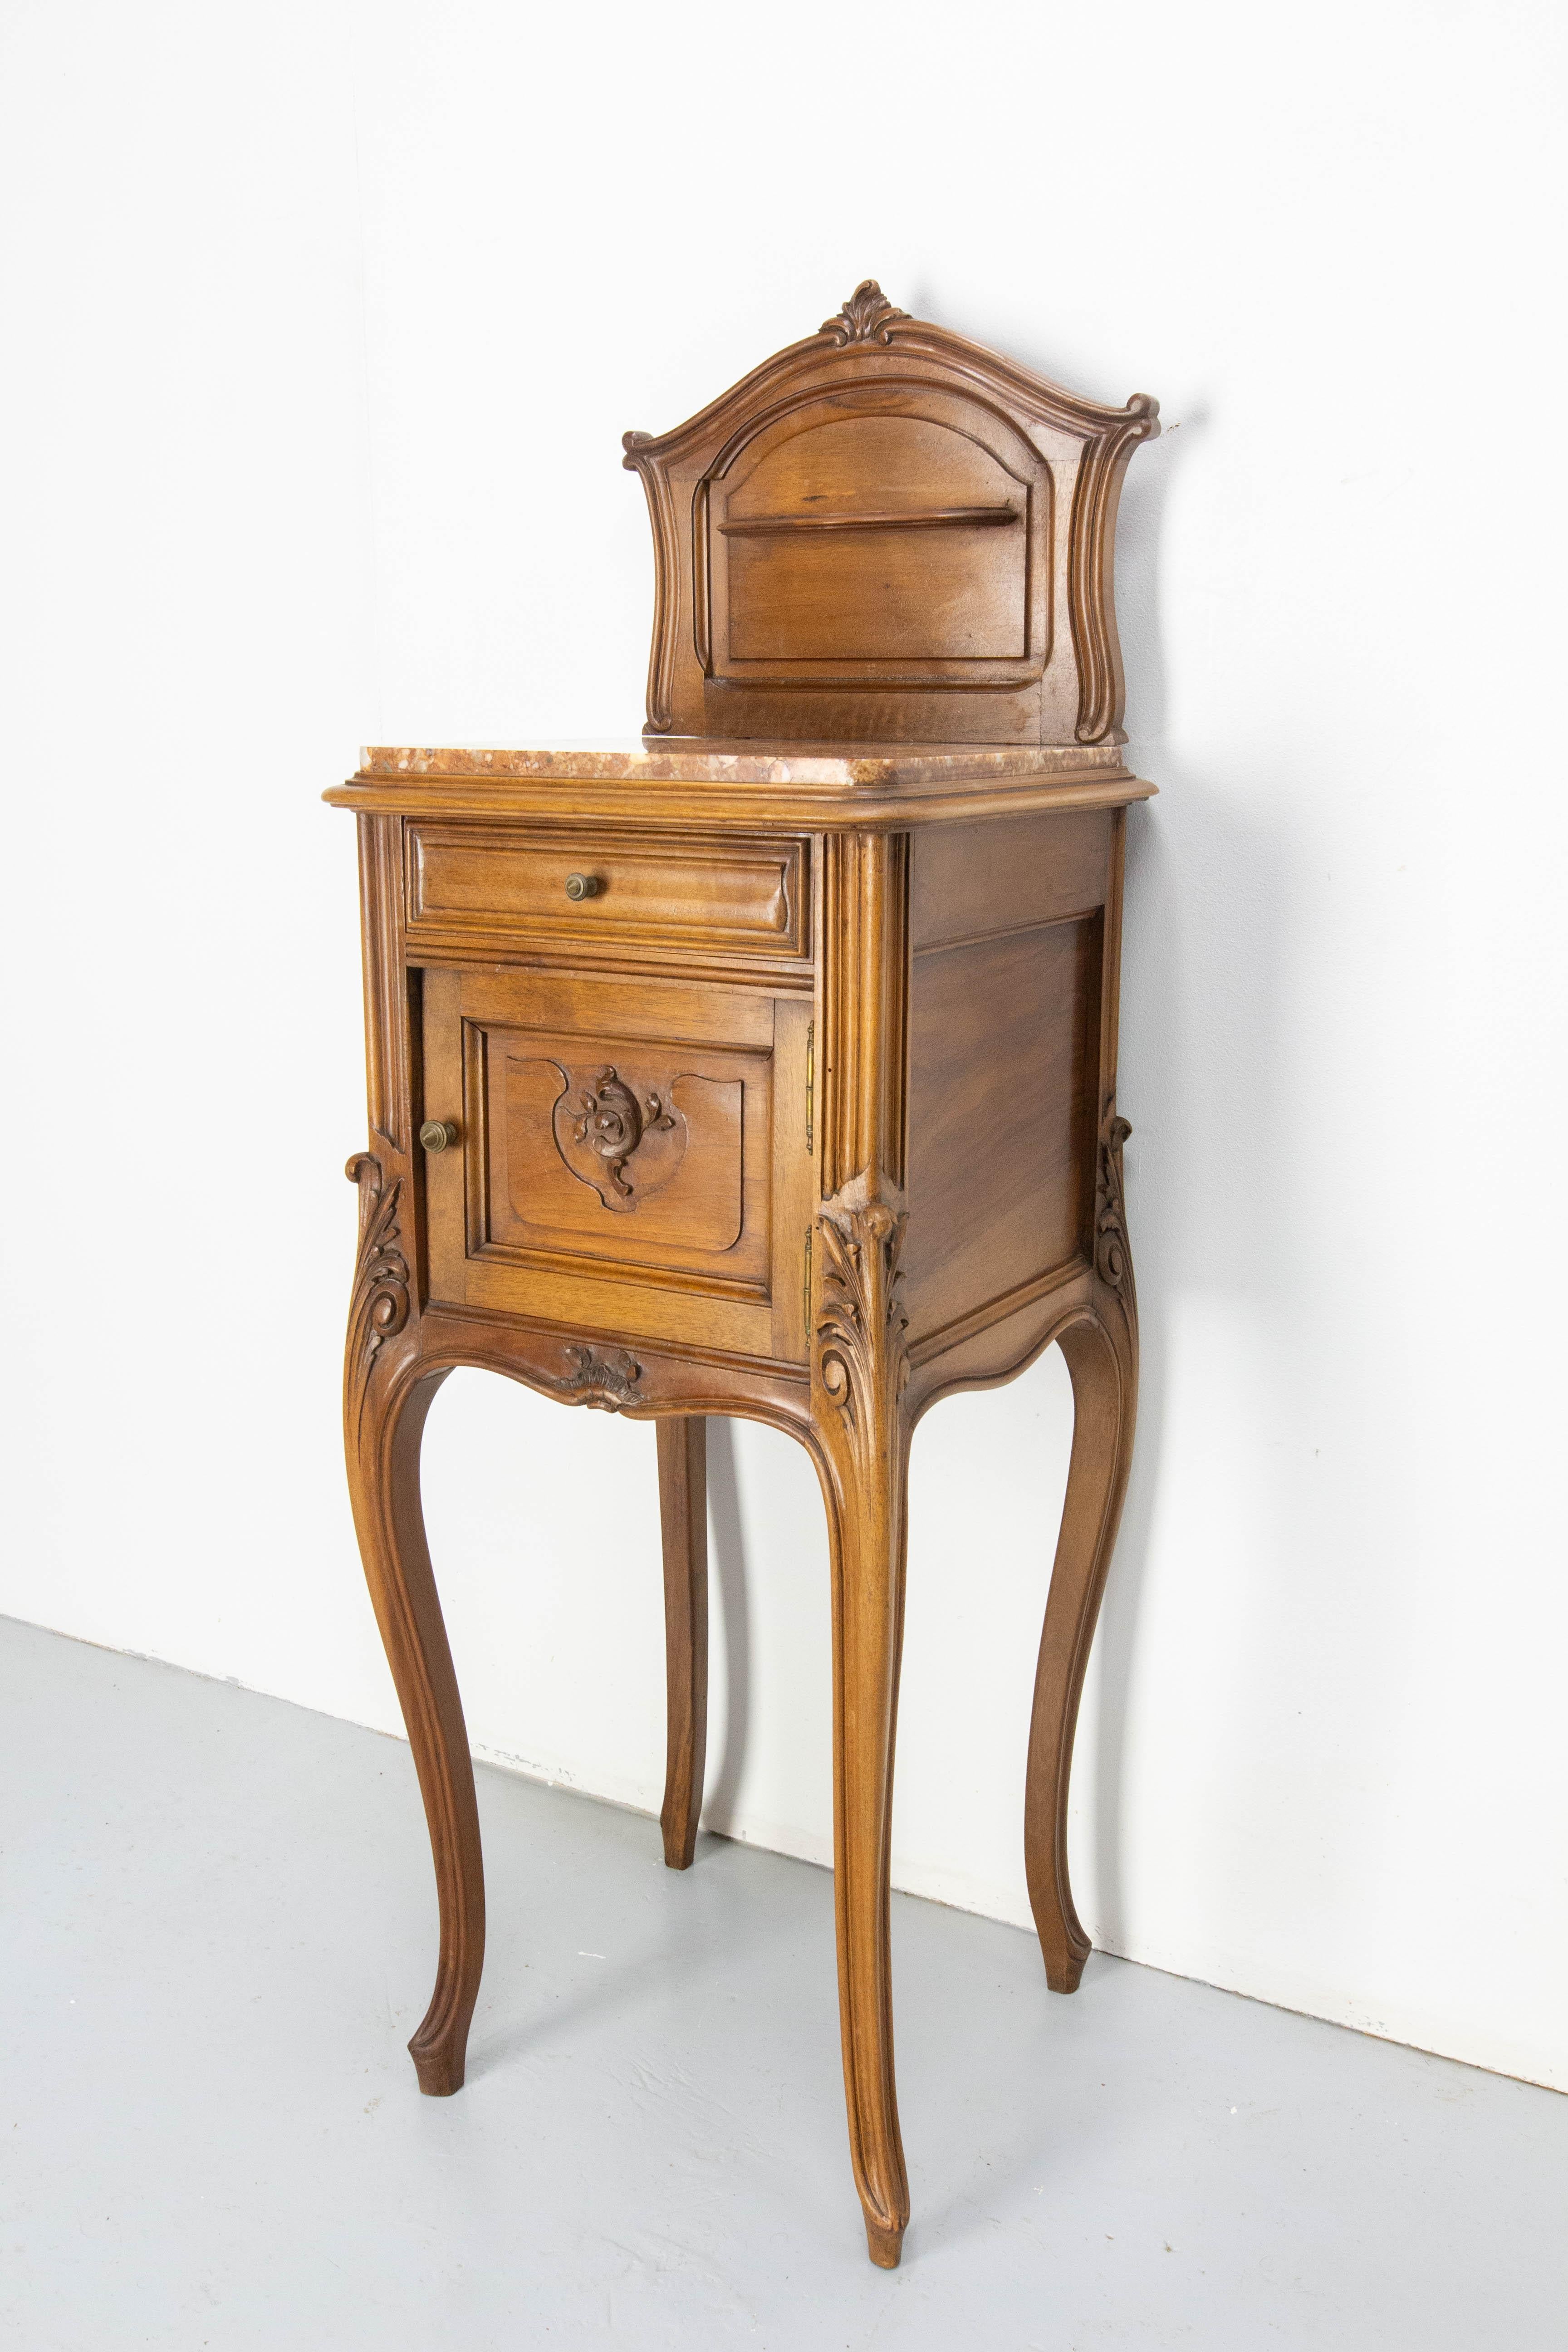 20th Century Louis XV St Side Cabinet Nightstand French Walnut Bedside Marbletop Table c 1900